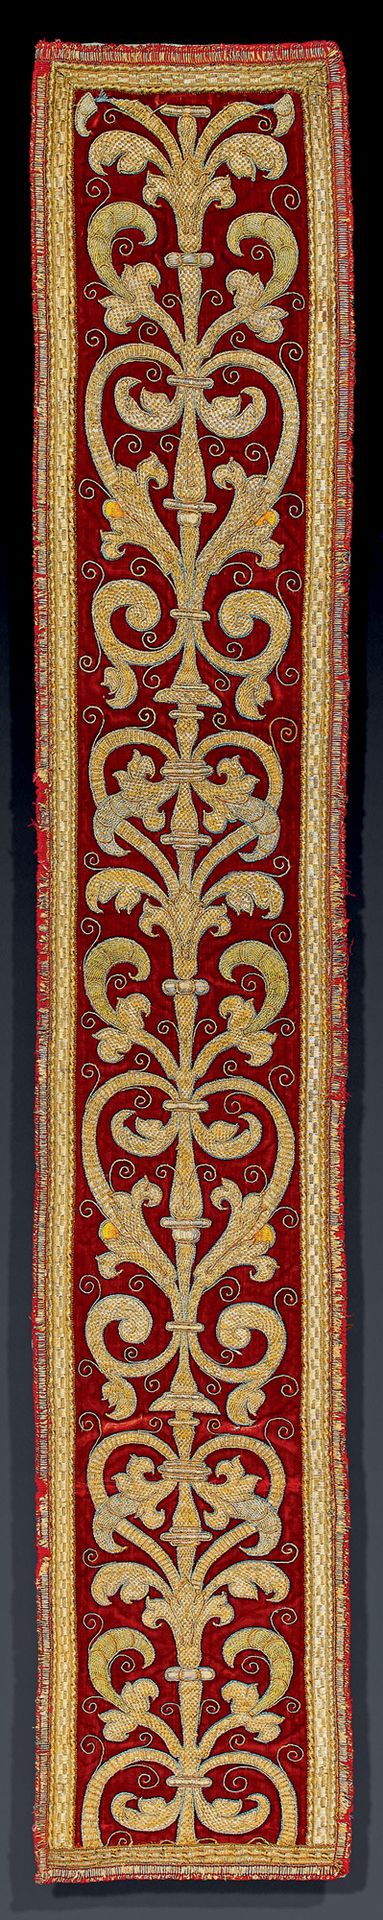 Null Embroidered headband, Italy or Spain, circa 1570-1580. Beautiful candelabra&hellip;